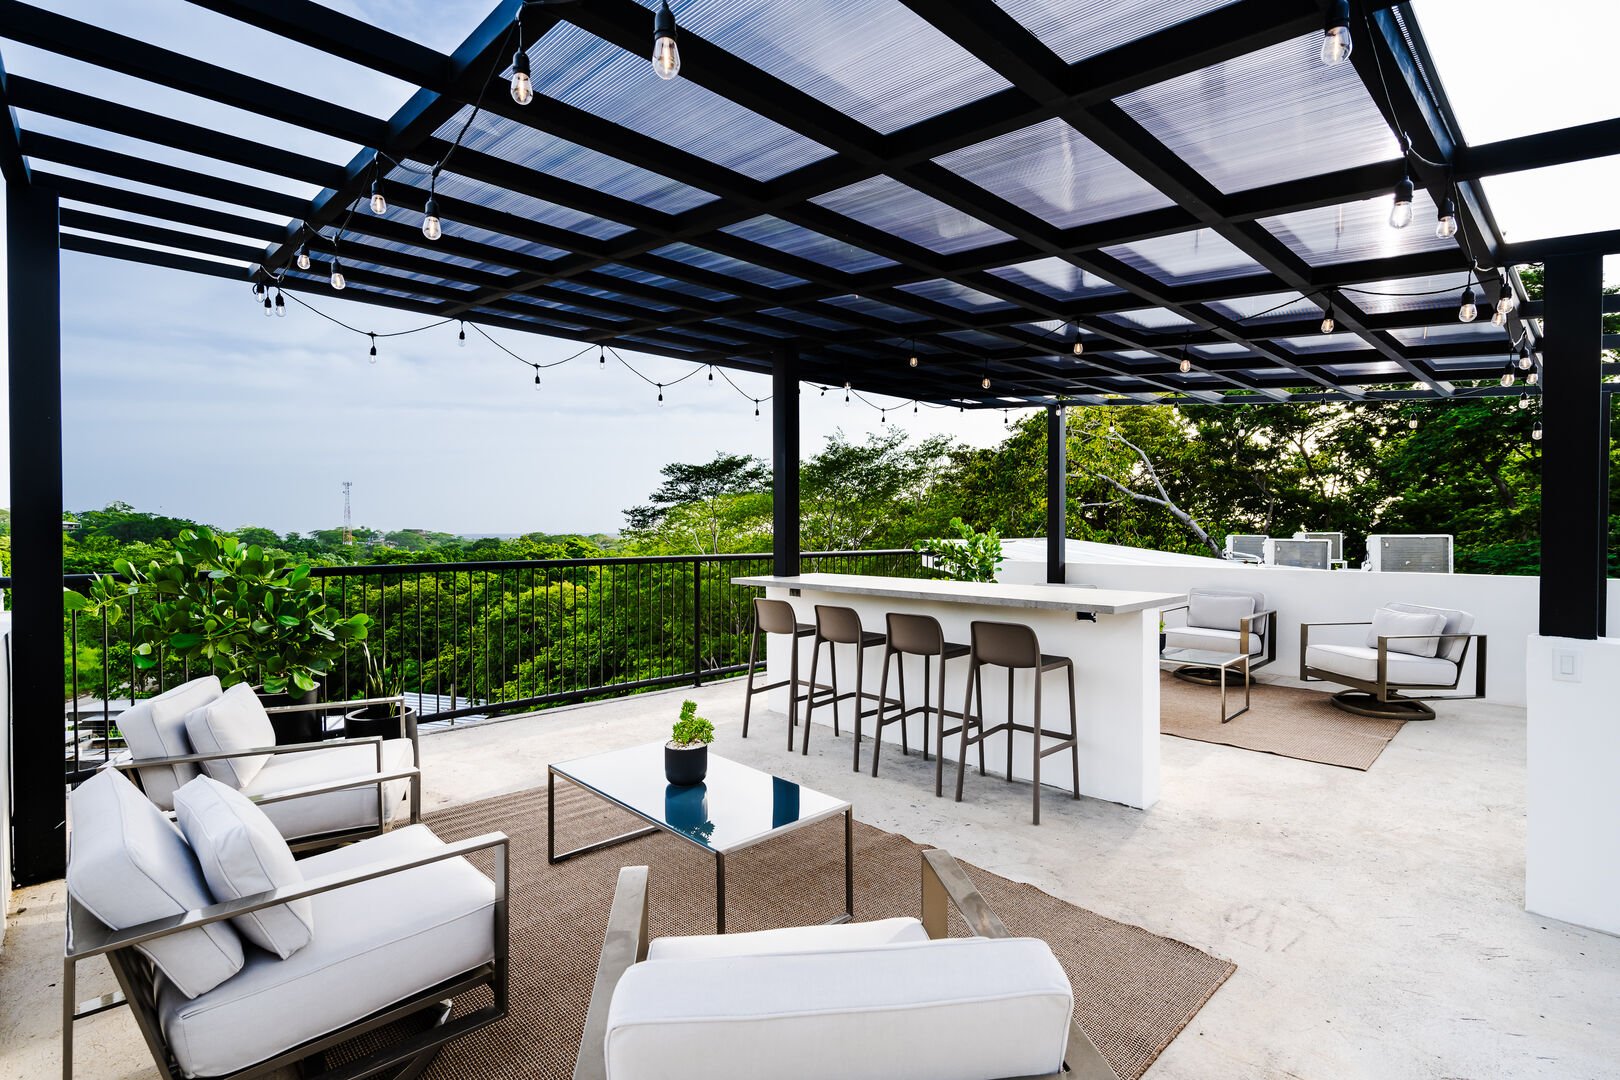 Sip, chill, and take in nature's view from our rooftop